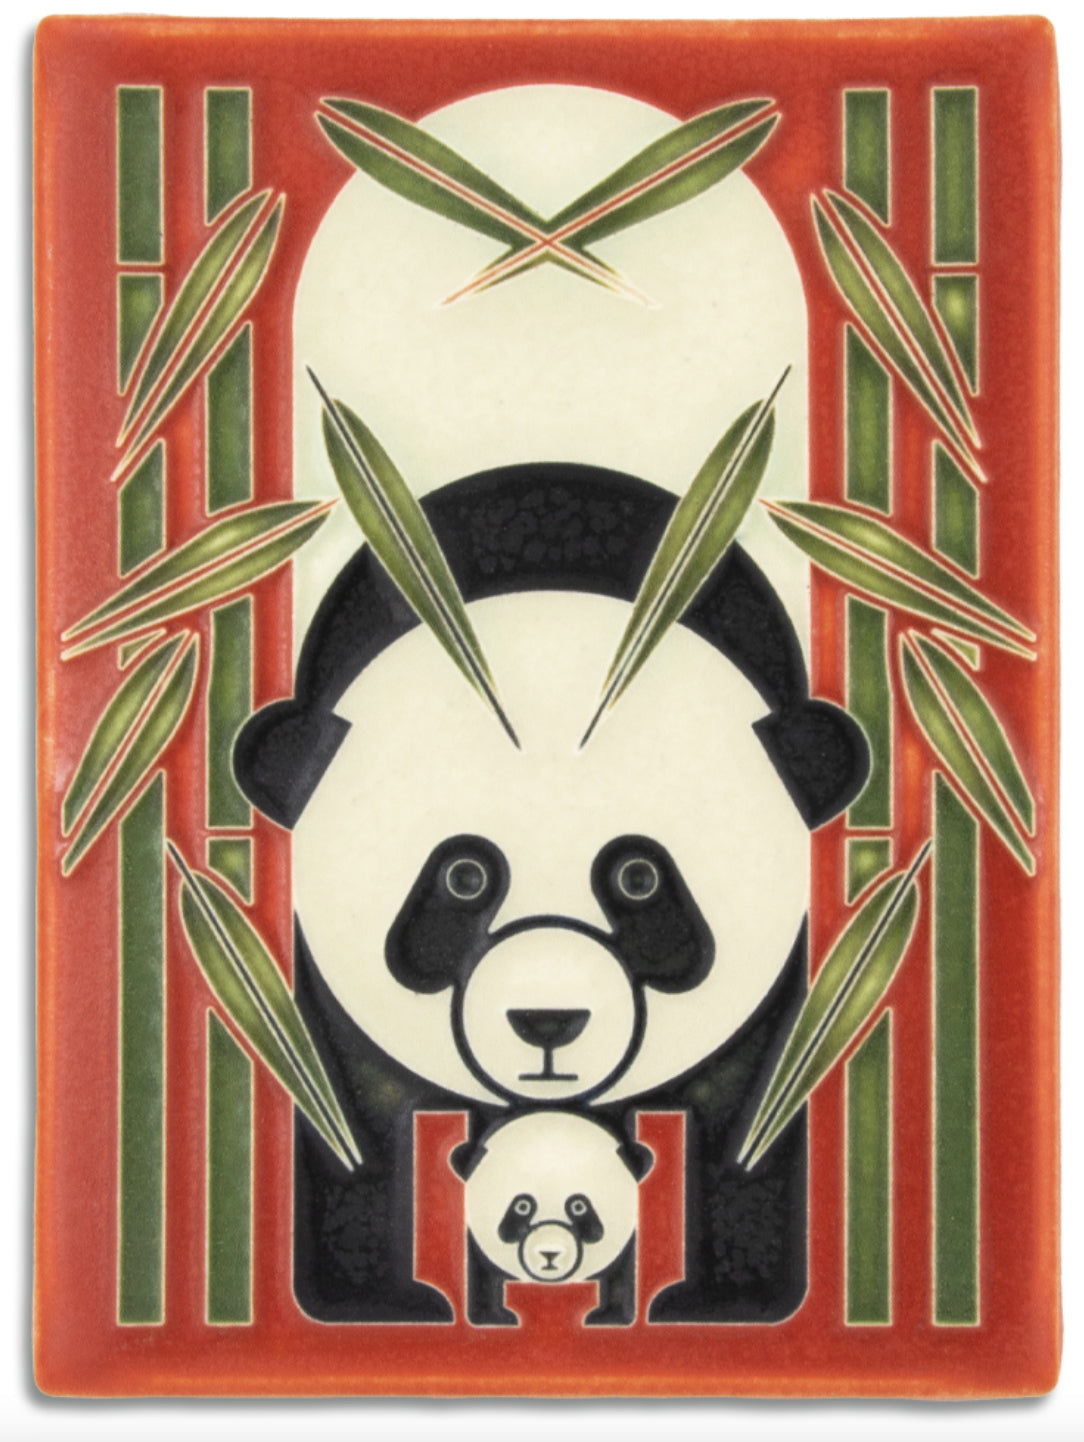 6x8 Panda Panda is based on a T-shirt design (and later a print) by Charley Harper. This sweet homage to panda parenthood is part of our extensive Charley Harper by Motawi line.